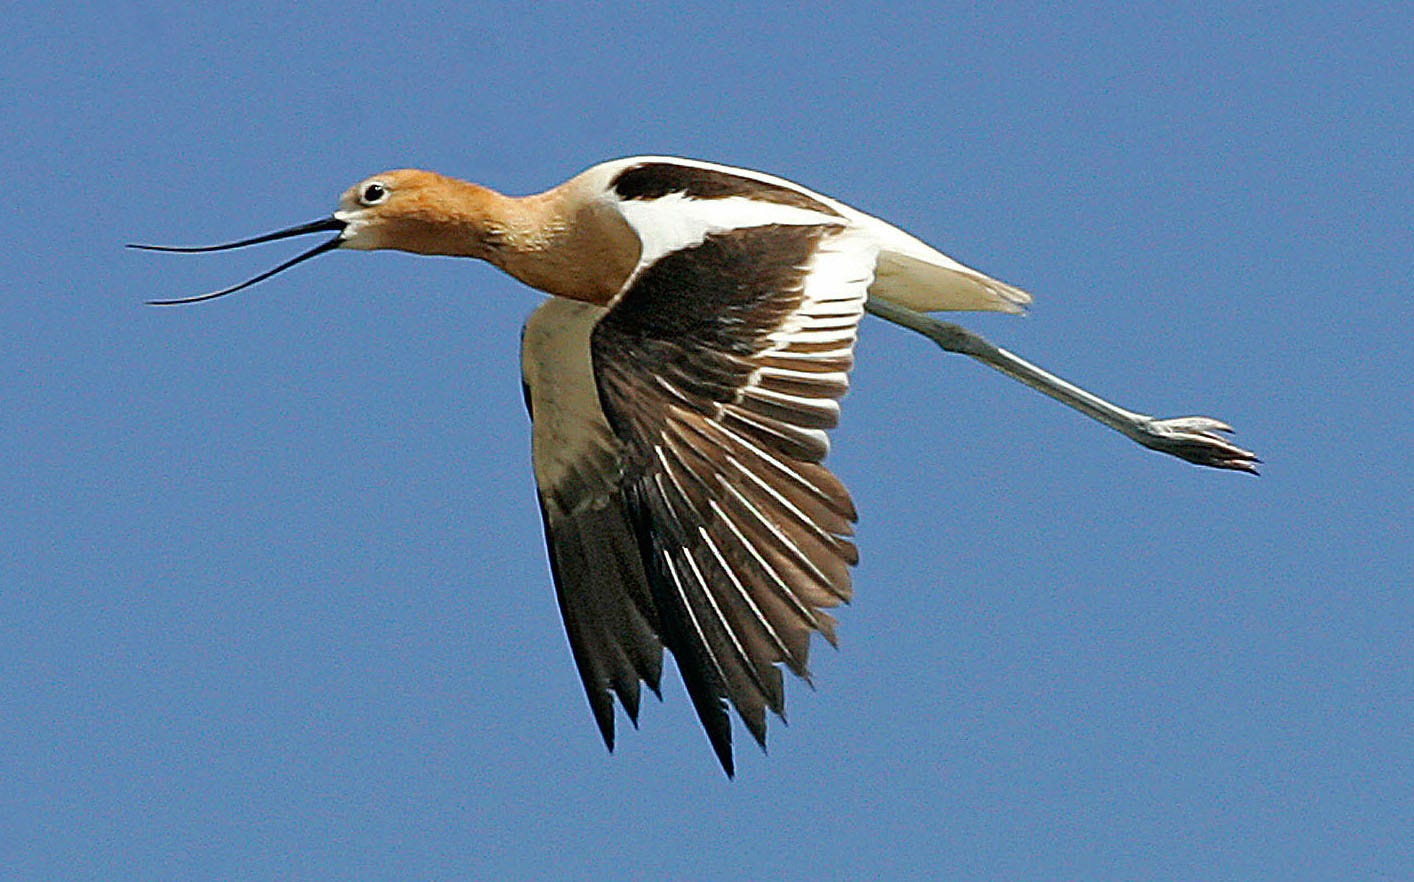 An avocet flies over one of the ponds that make up the Salton Sea Ecosystem Monitoring Project near Niland in 2010.